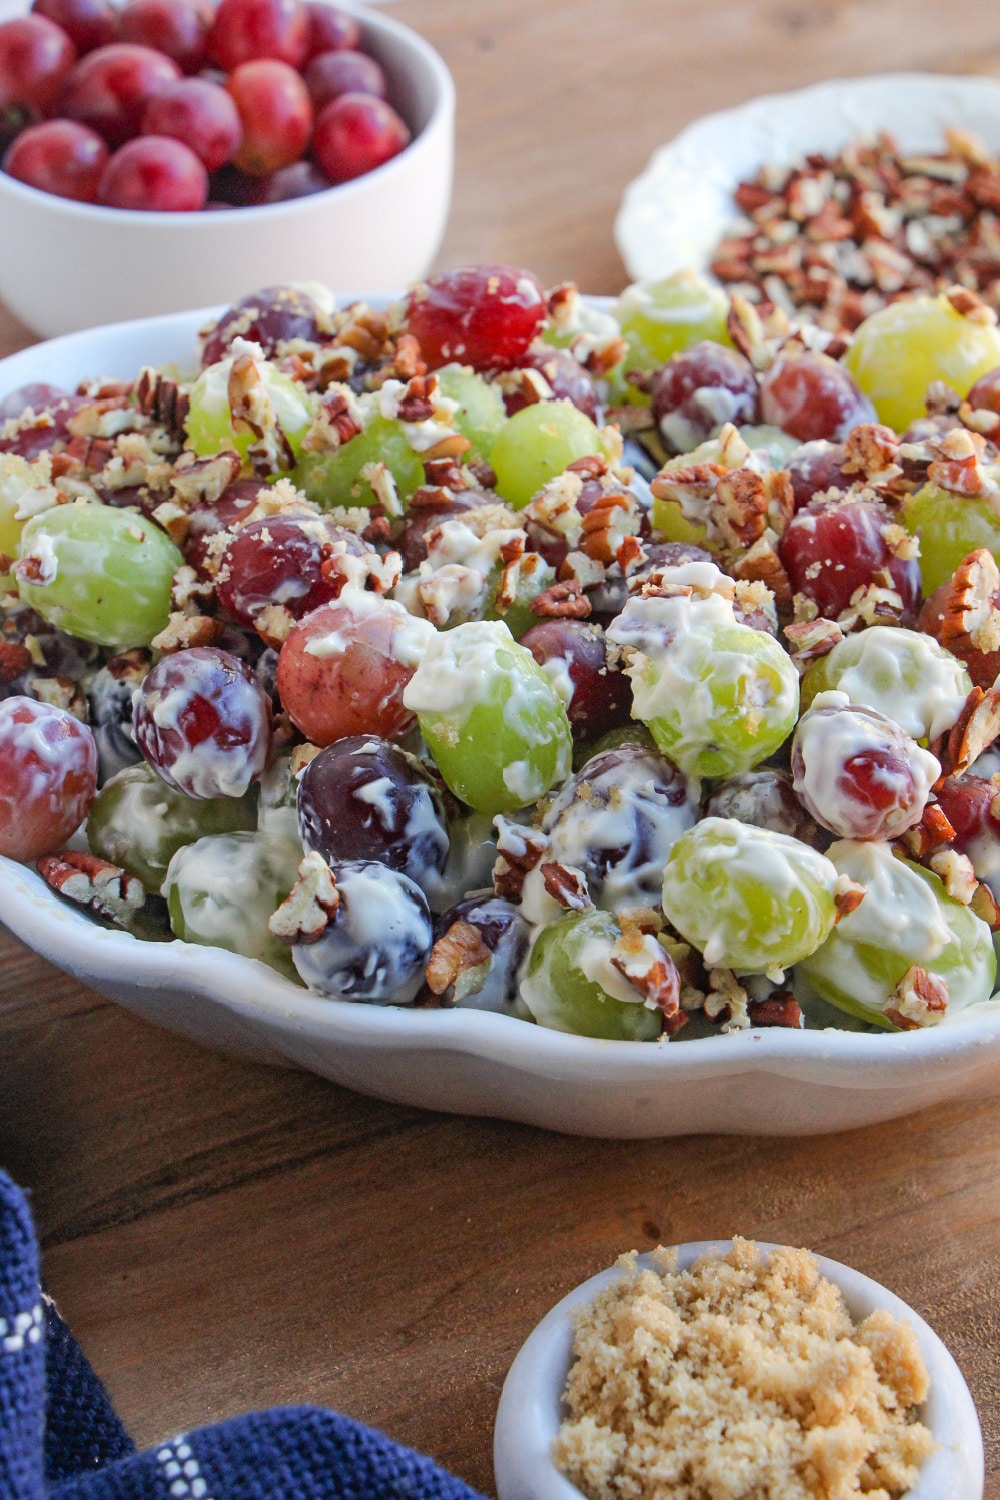 Grape salad in a white bowl garnished with chopped pecans.